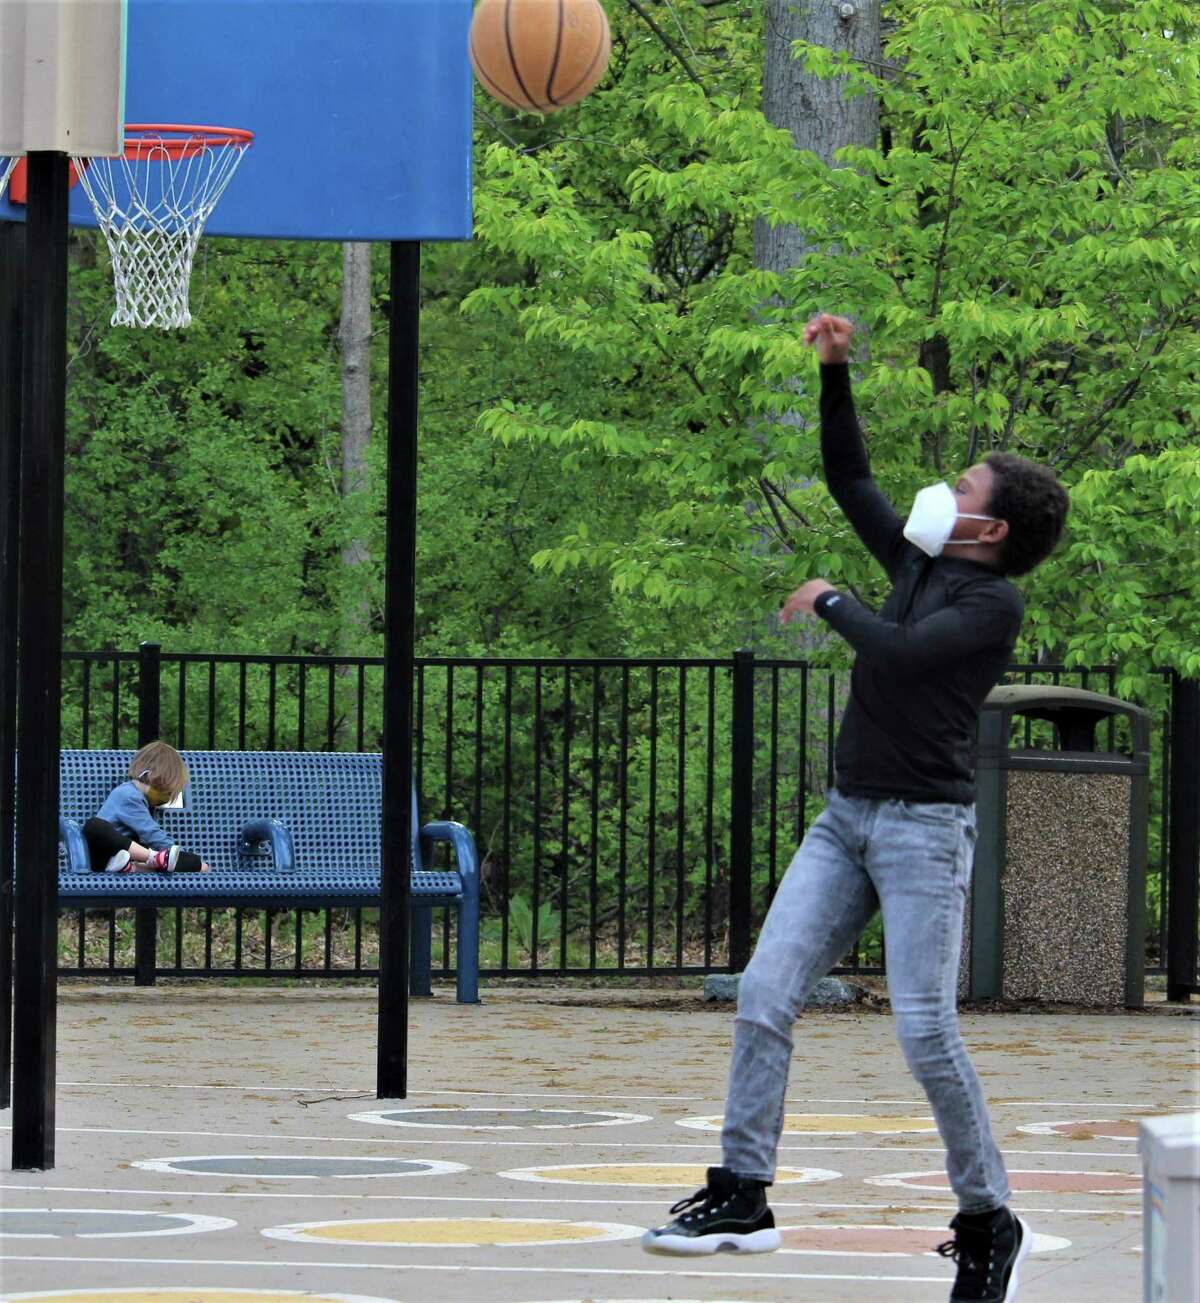 Chase W. Dillon, 11, is one of the stars of the new Amazon limited series The Underground Railroad, directed by Academy Award winner Barry Jenkins. The kid from central Connecticut is collecting great reviews. He is shown in a Hartford area playground.